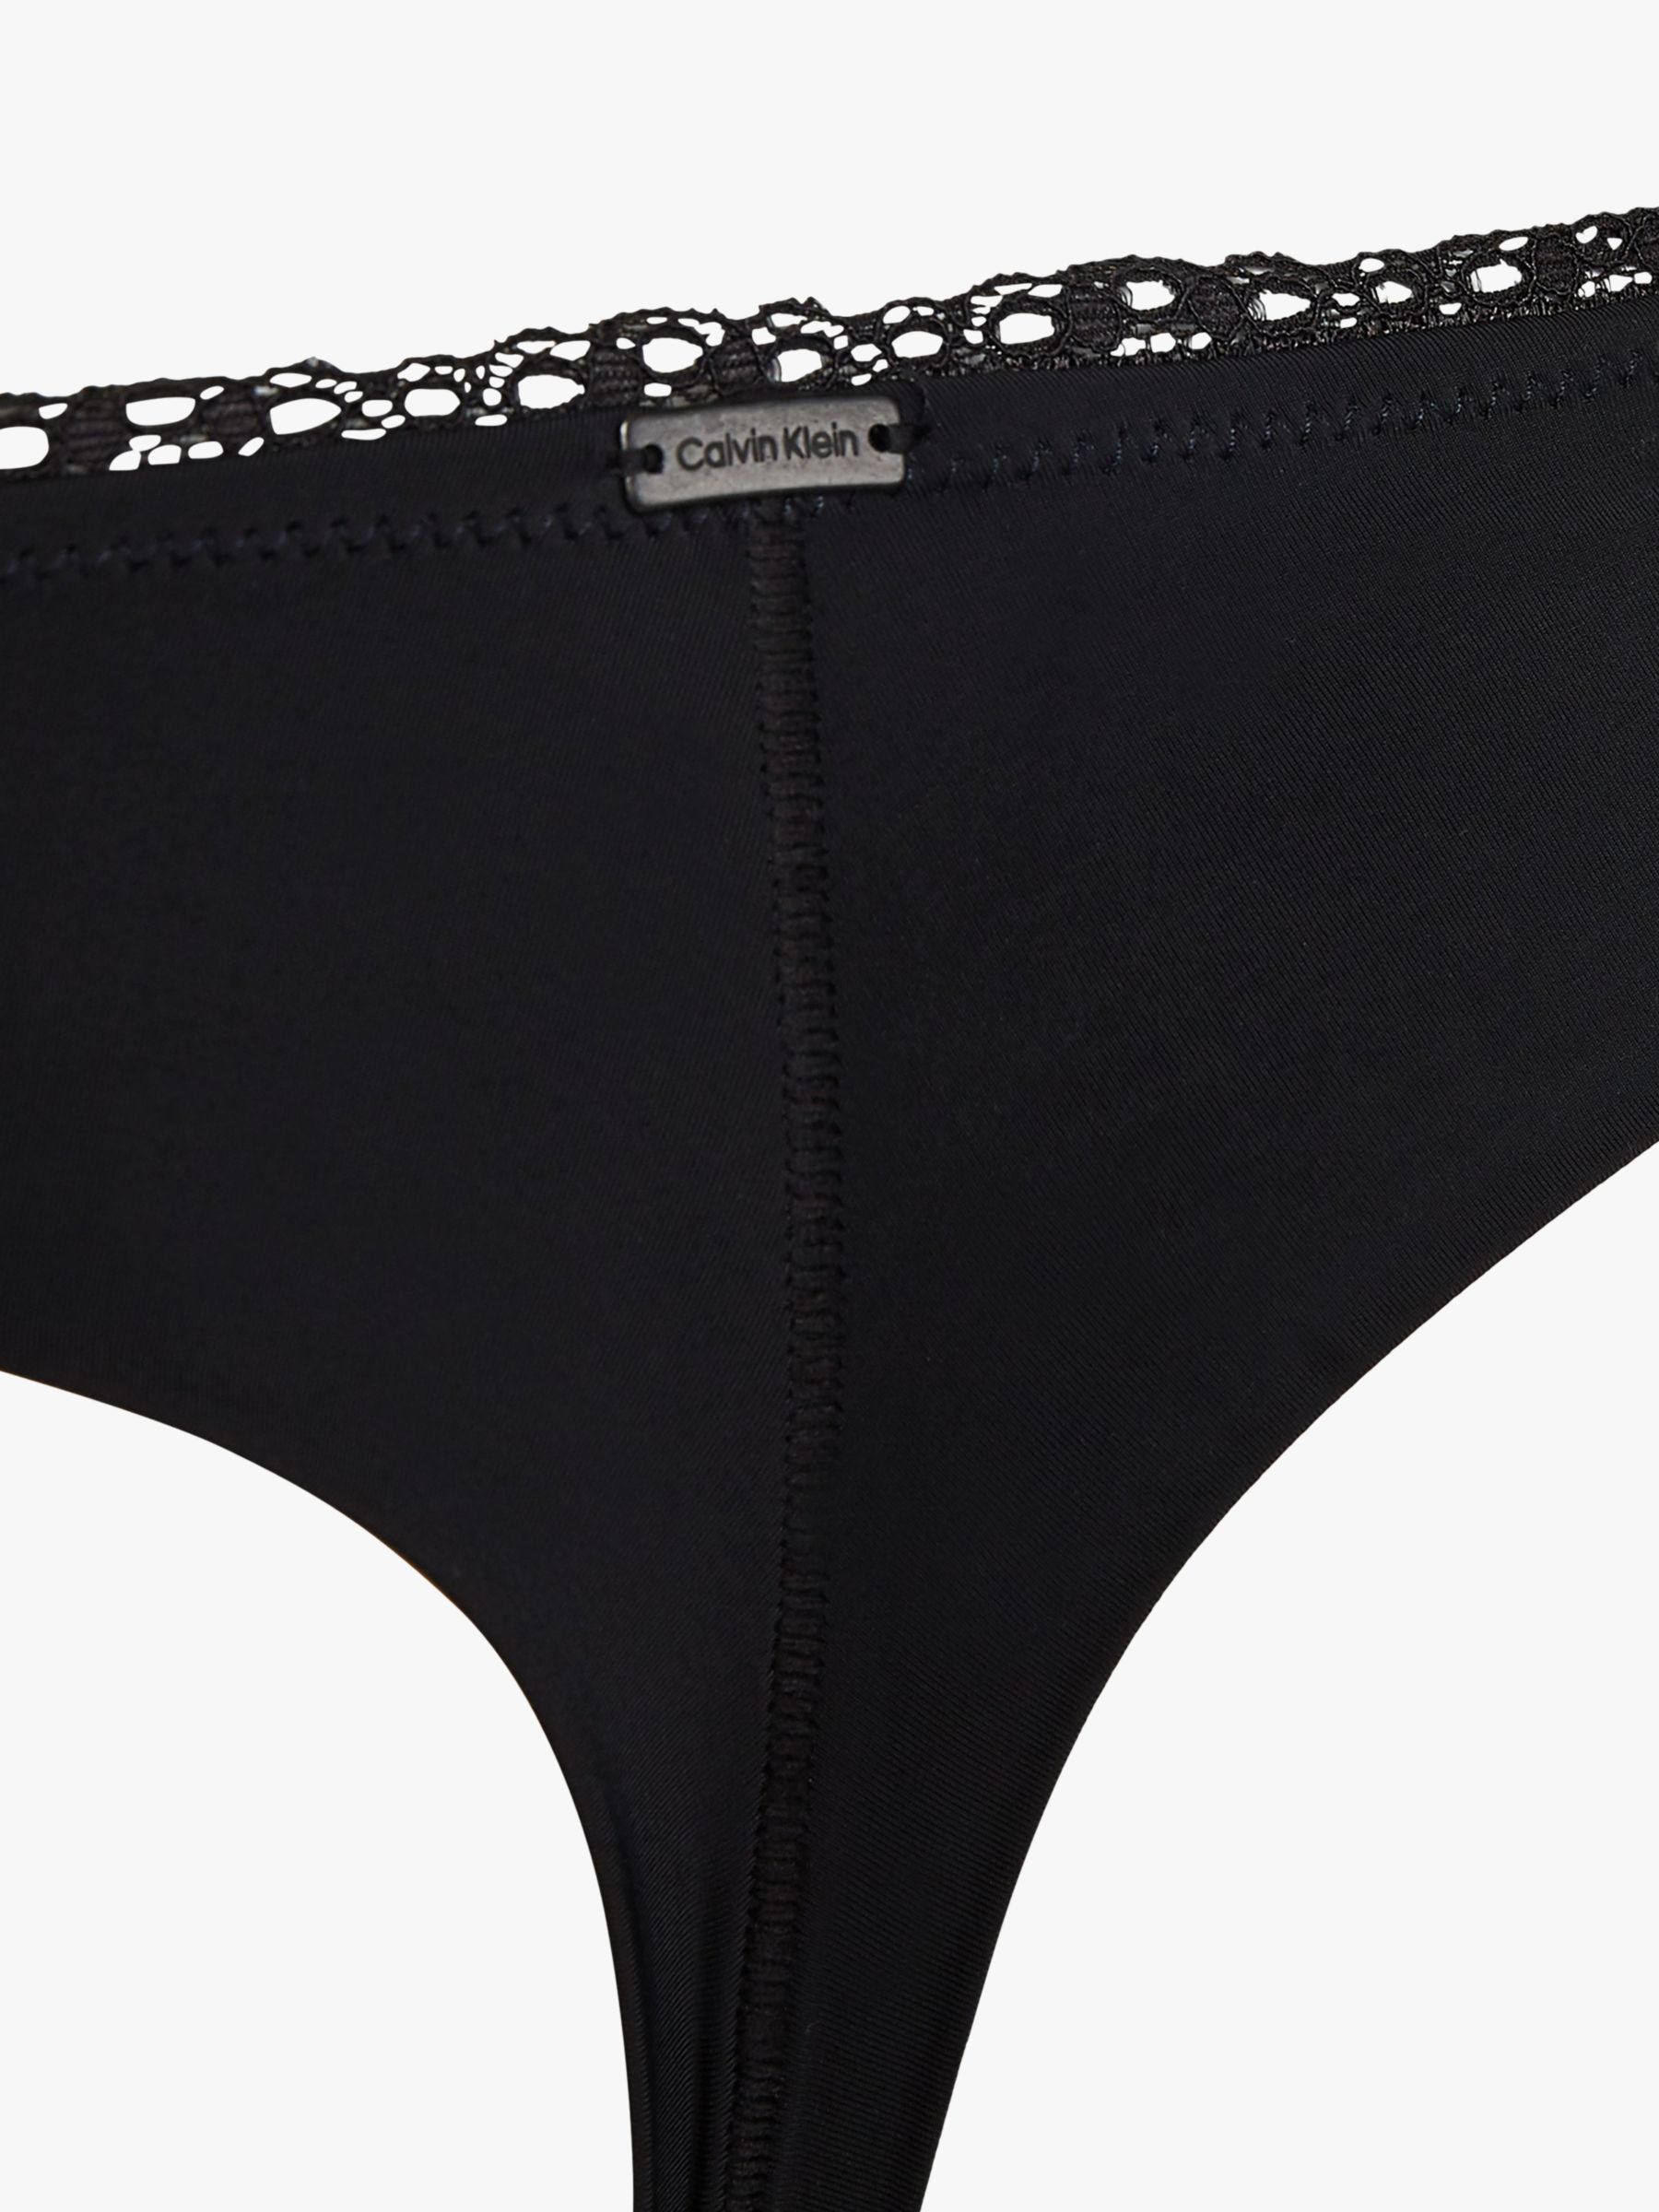 Buy Calvin Klein Seductive Comfort Light Thong from Next Luxembourg